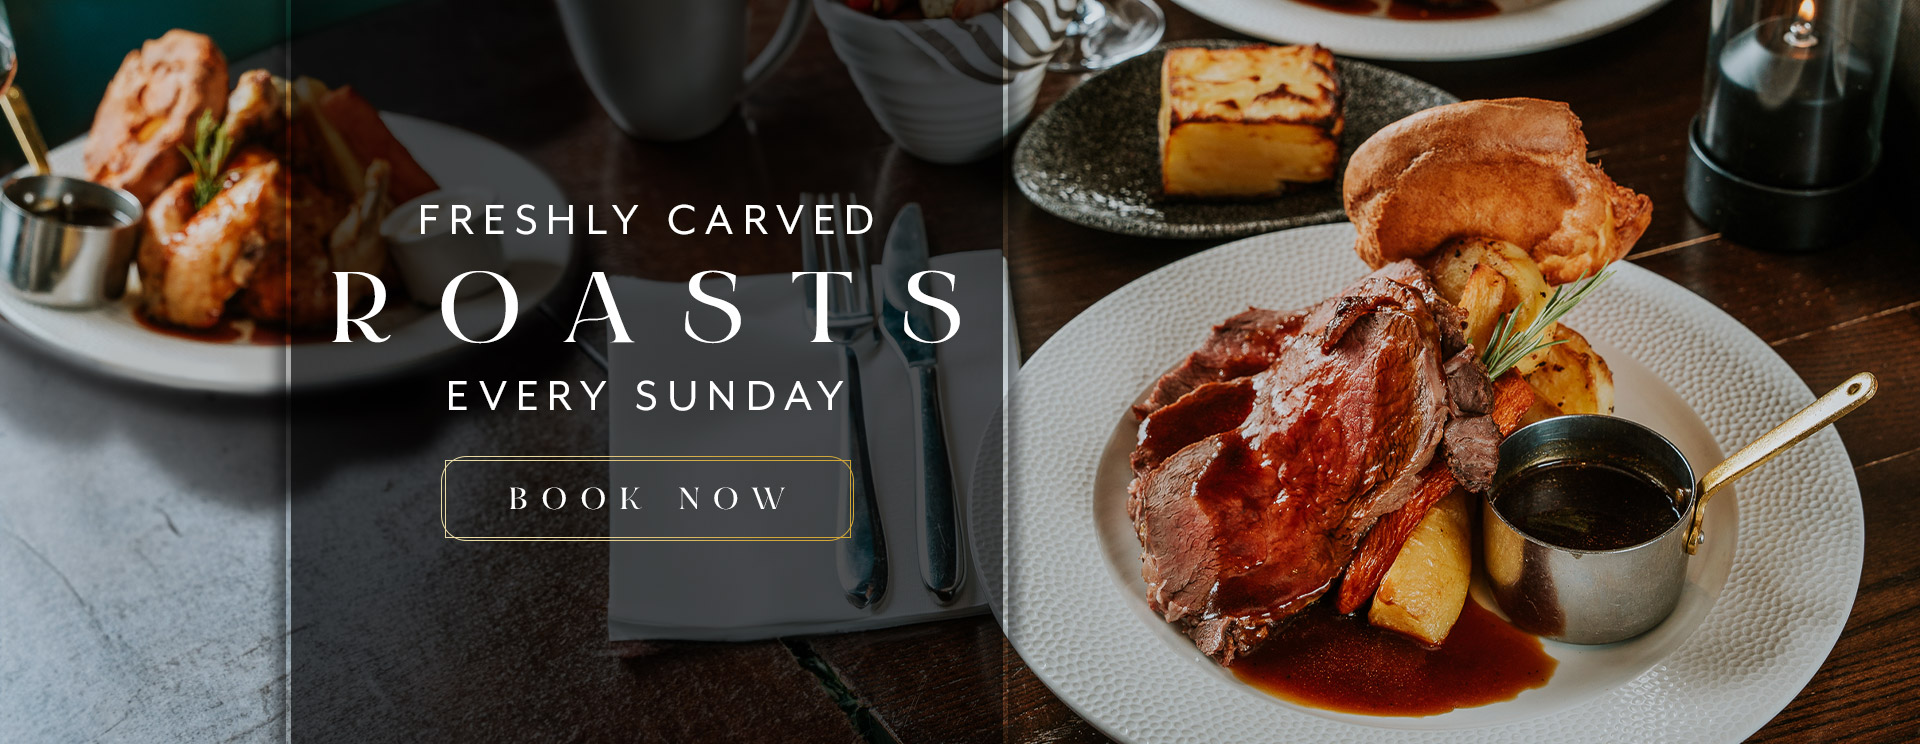 Sunday Lunch at The Cowper Arms